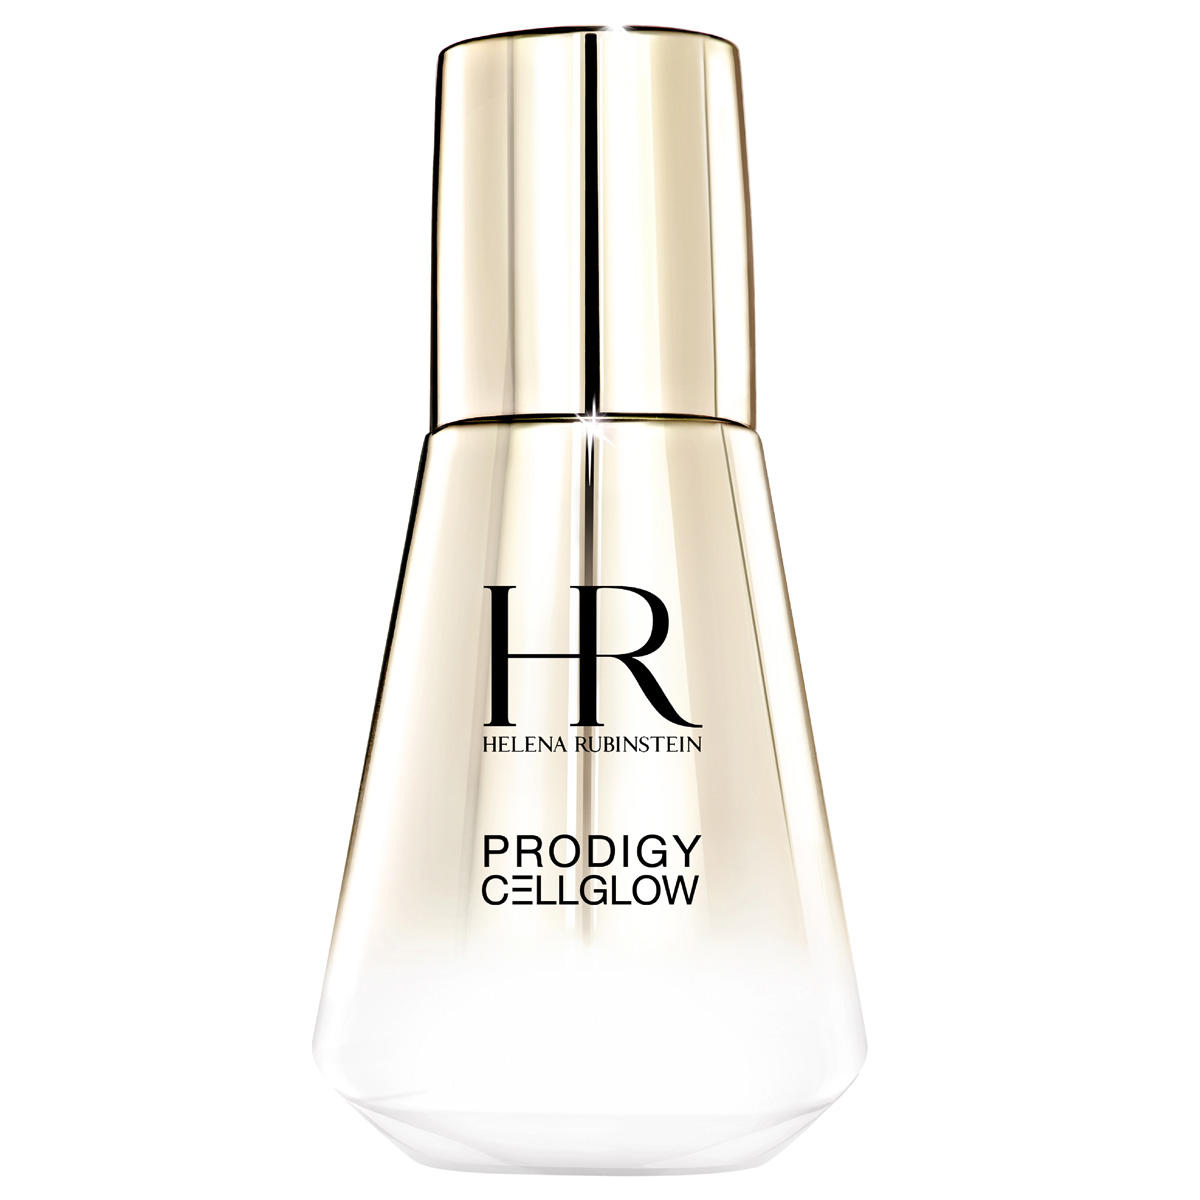 Helena Rubinstein PRODIGY CELLGLOW Concentrate  - 1